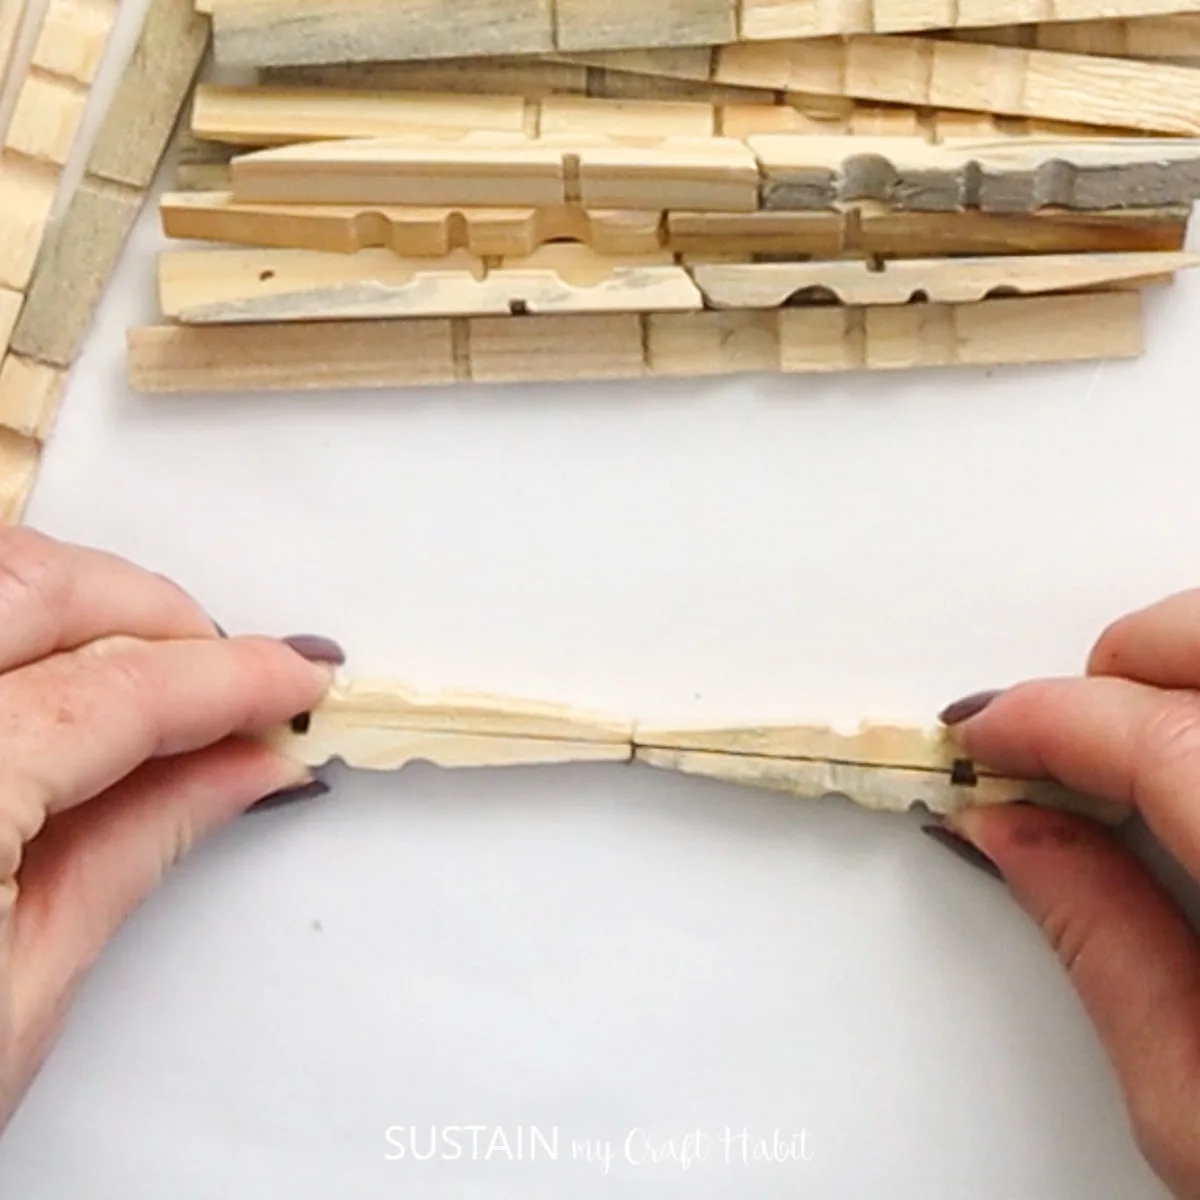 Gluing tips of clothespins together.